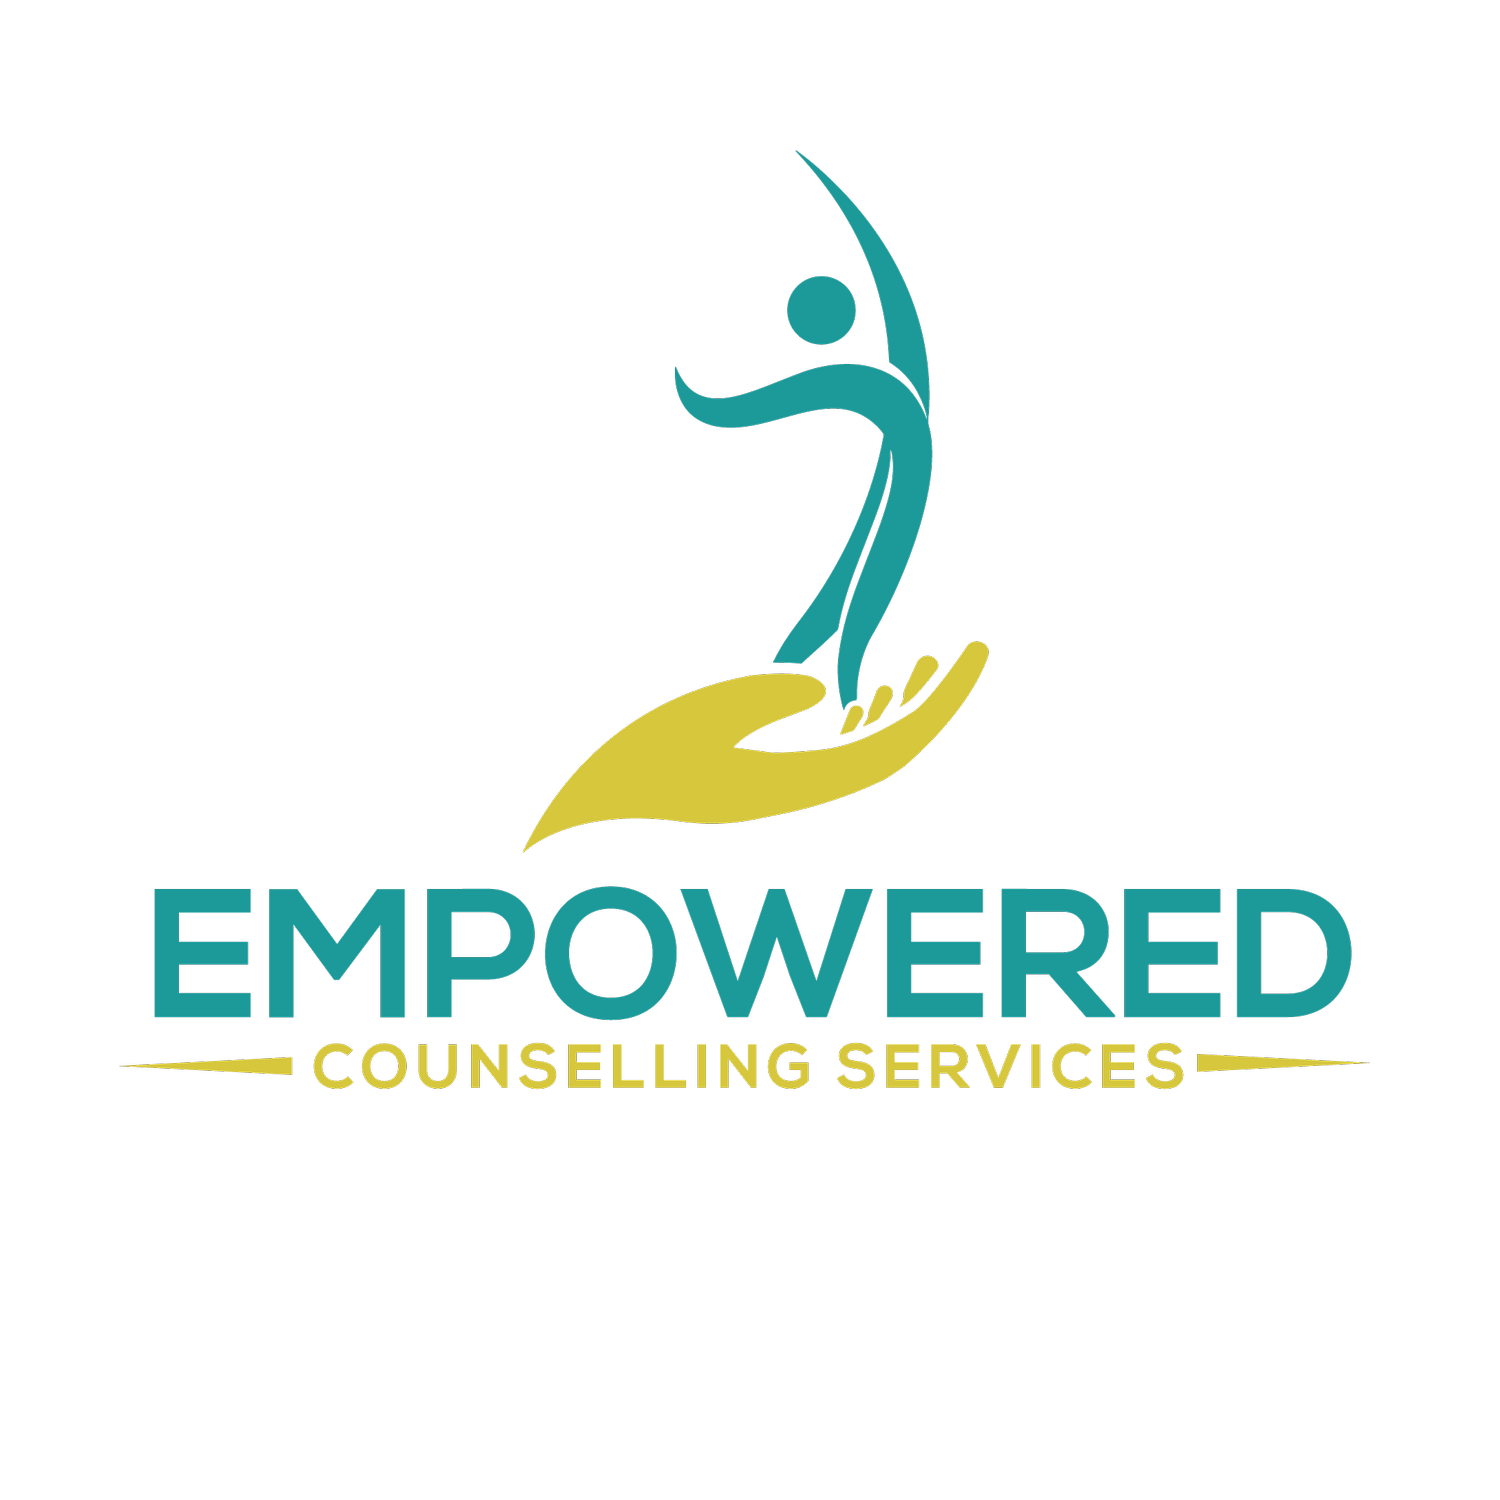 Empowered Counselling Services